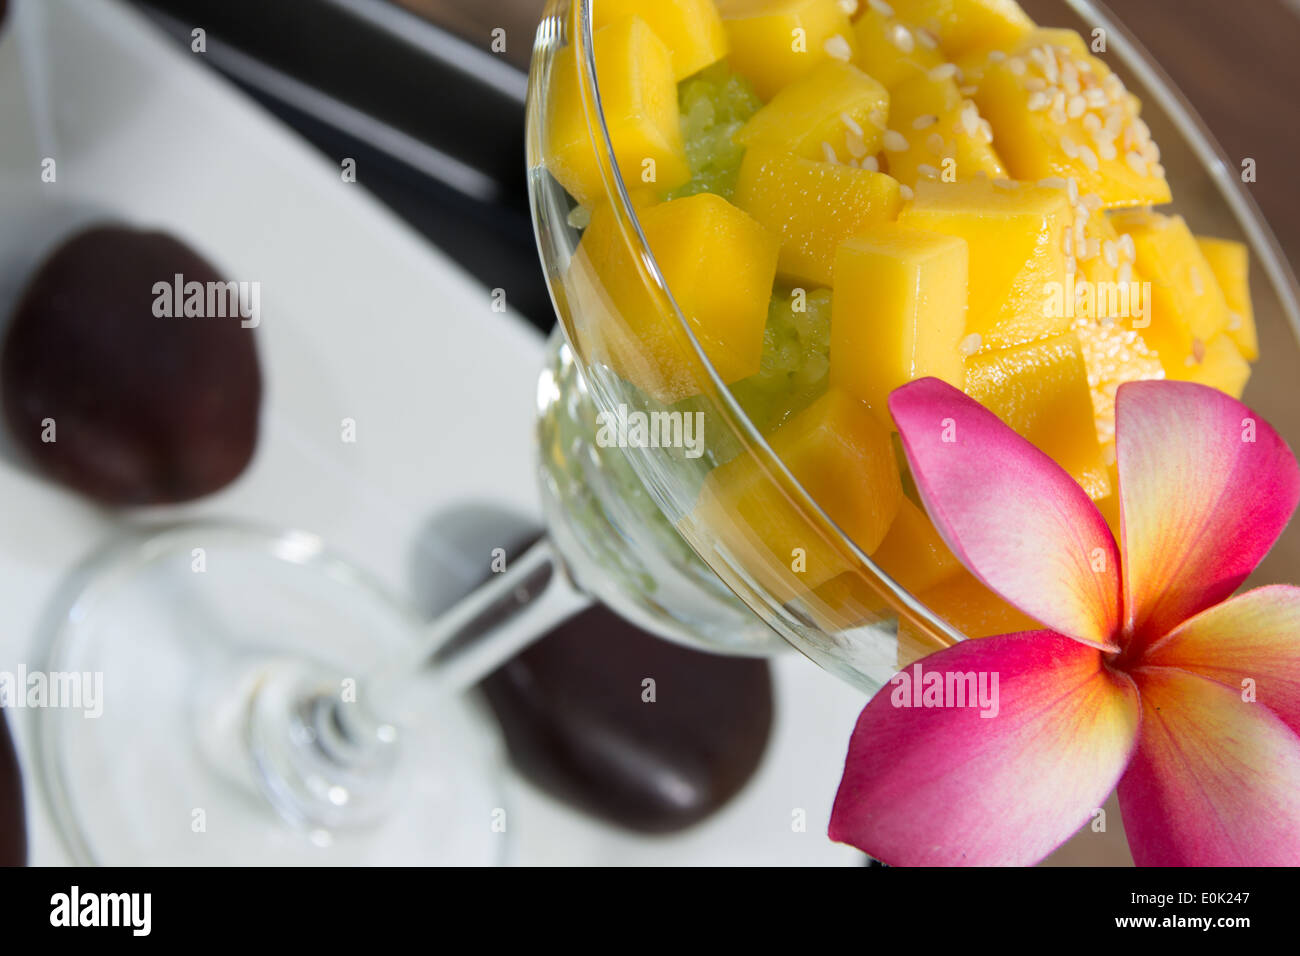 Glutinous rice with mangoes Stock Photo